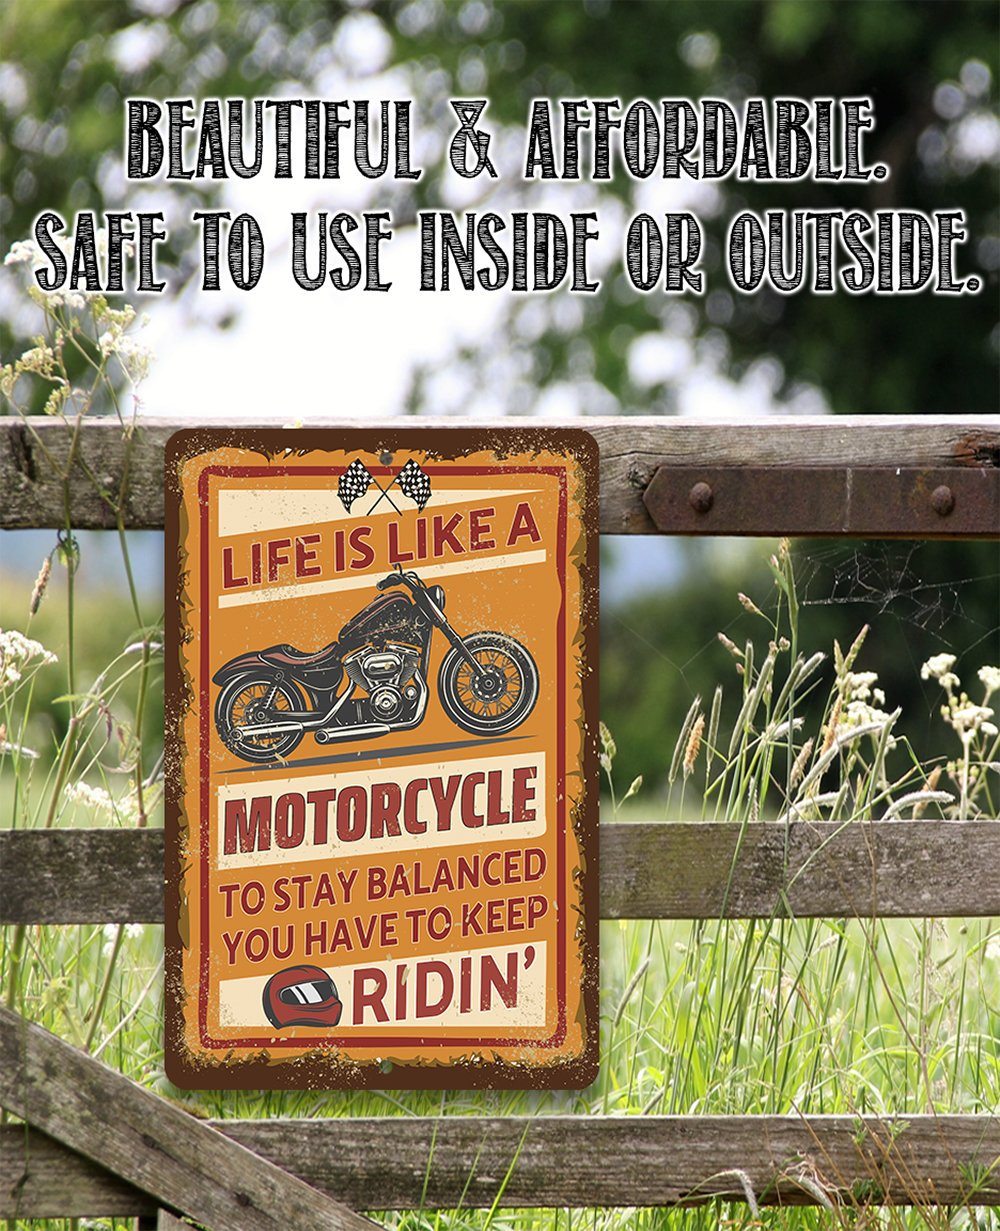 Life Is Like A Motorcycle - Metal Sign | Lone Star Art.